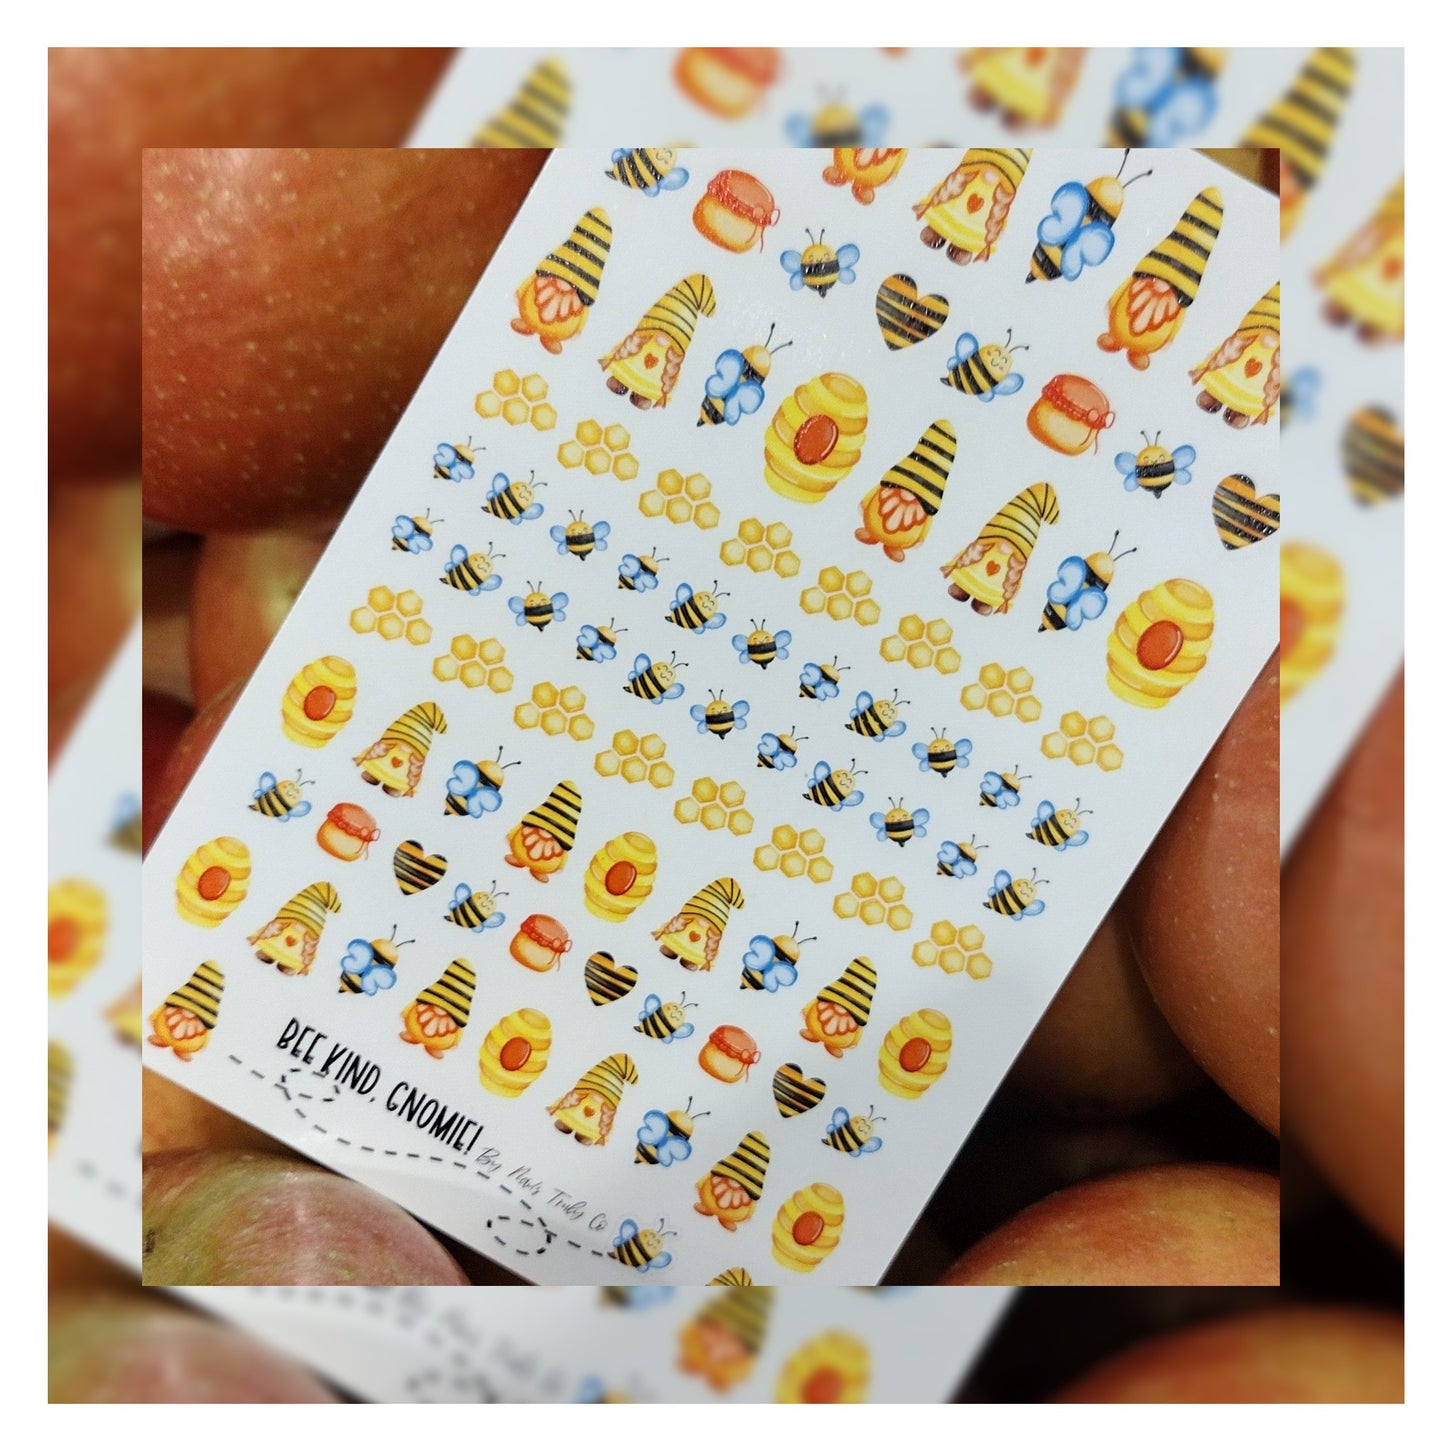 Bee Kind, Gnomie - Decals For Nails